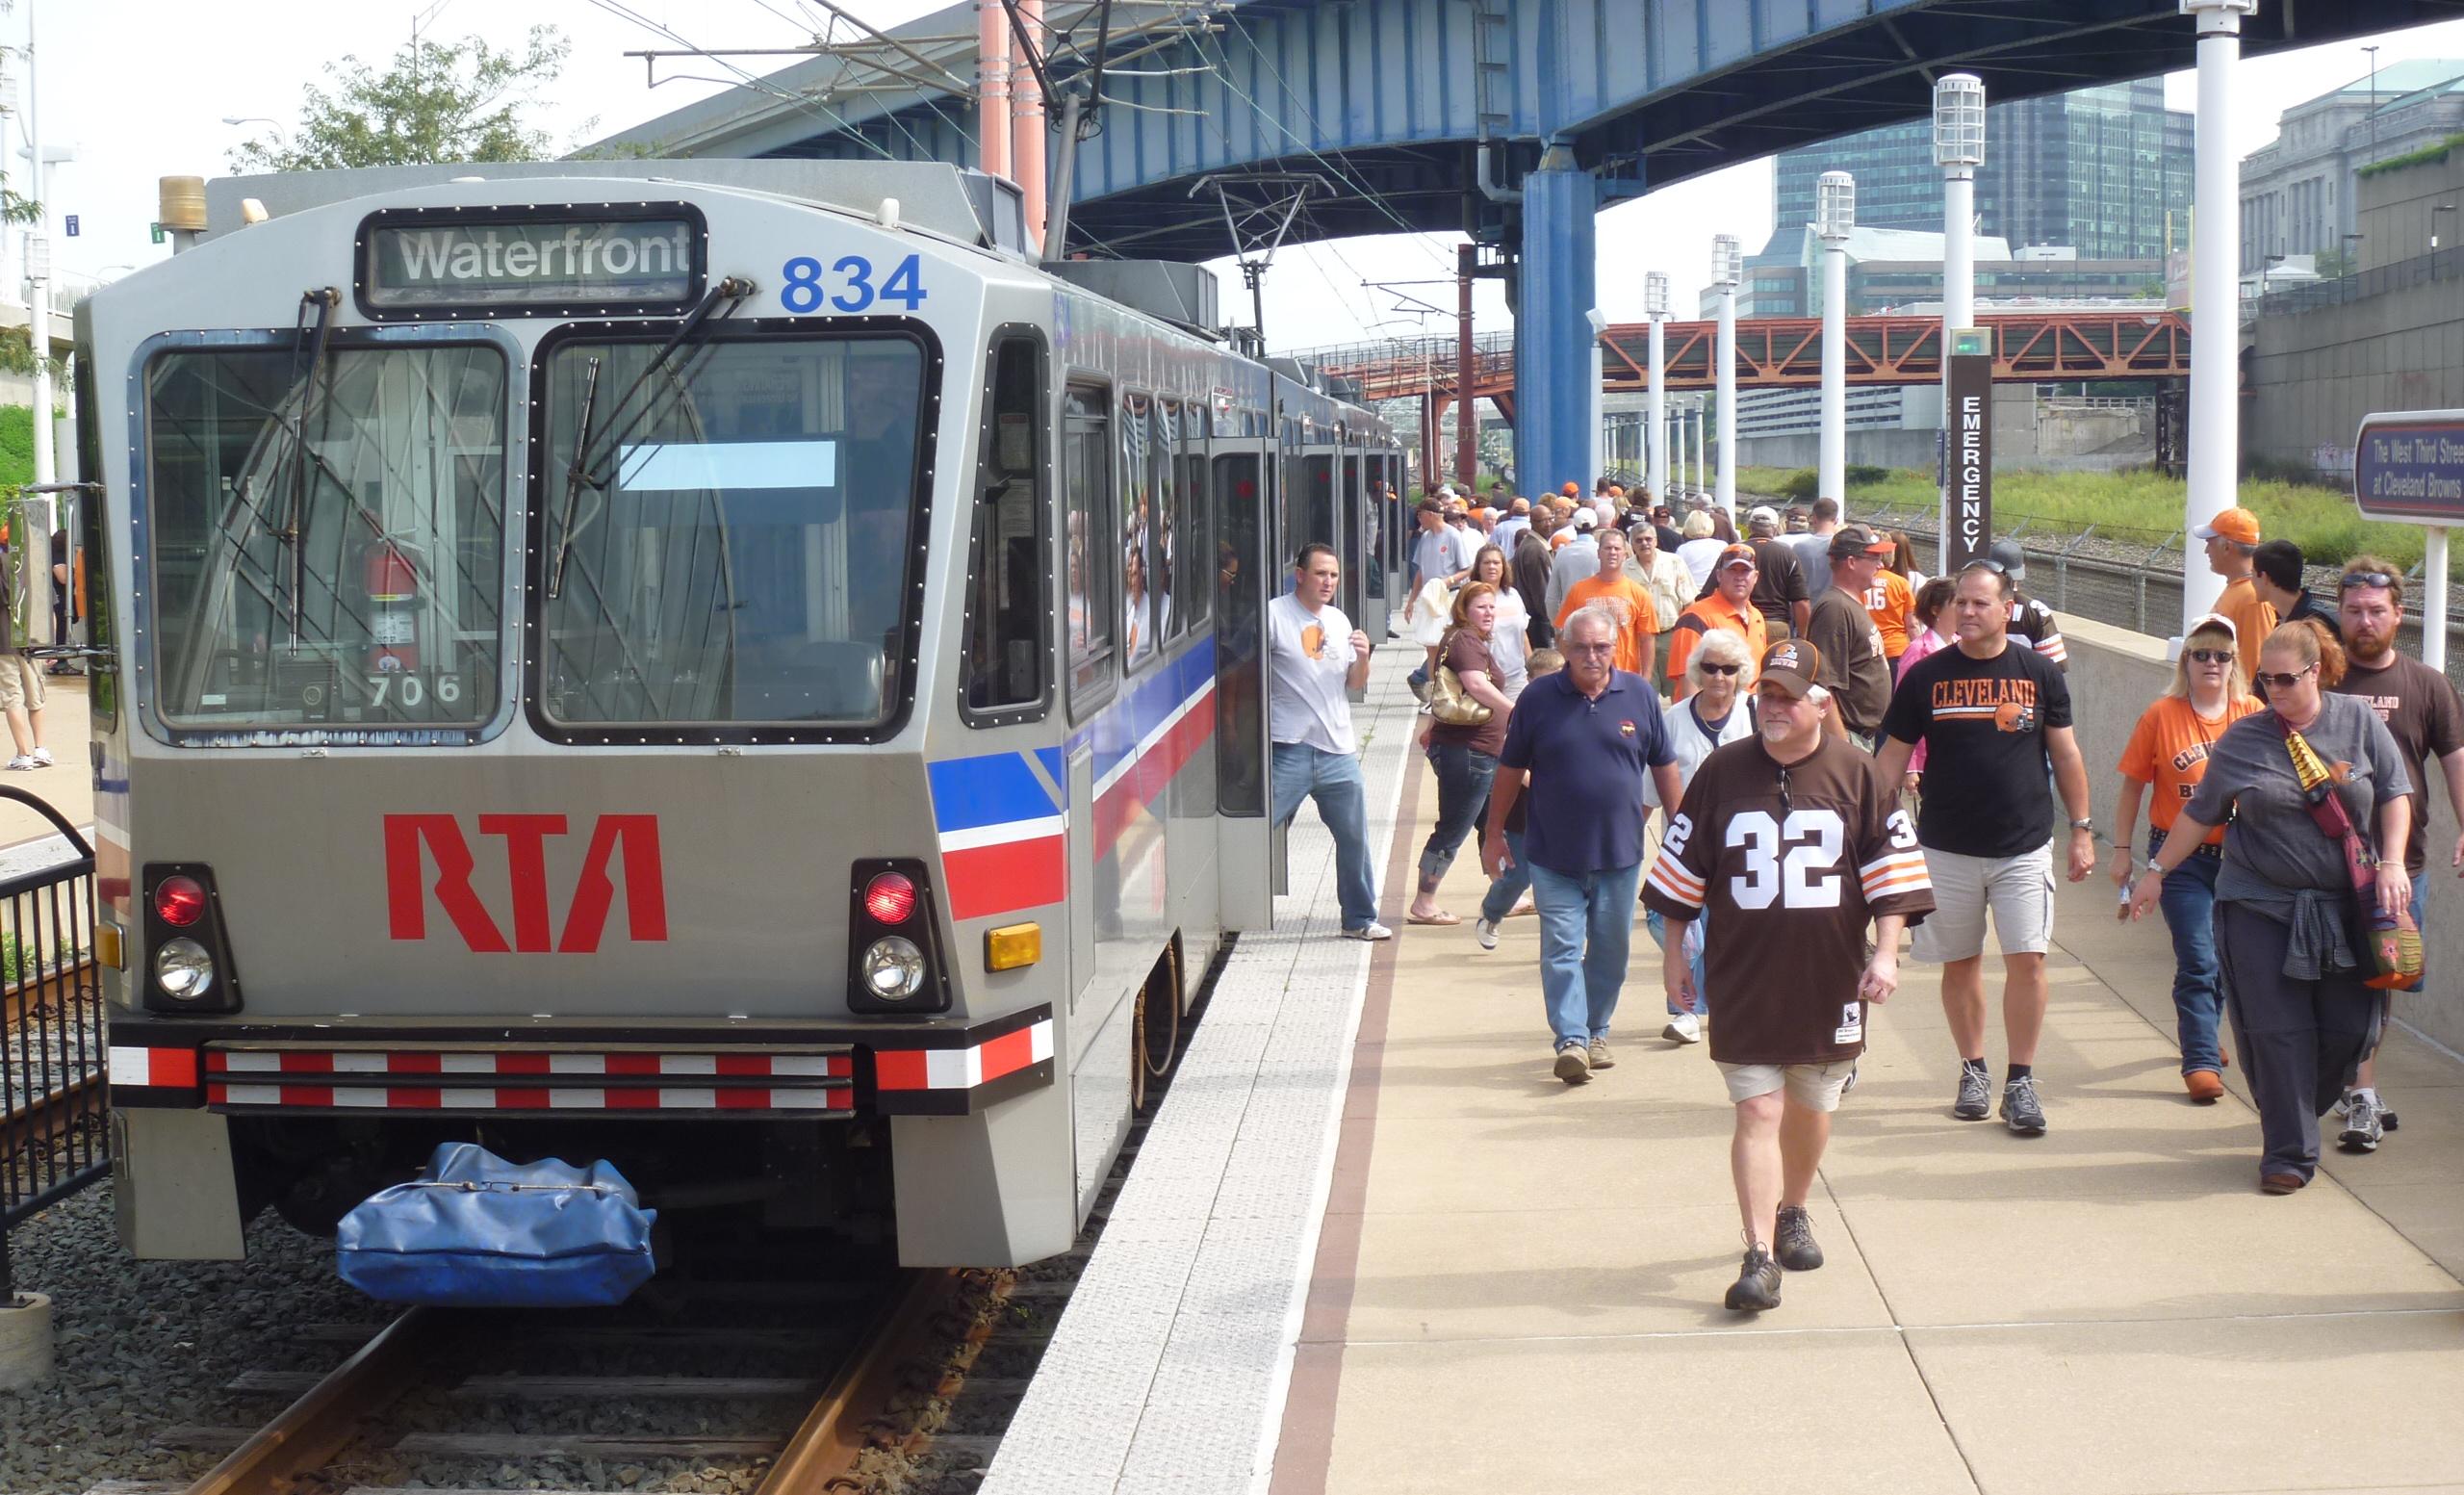  Dec 17, 2017: Ride the Waterfront Line to watch the Browns play the Ravens